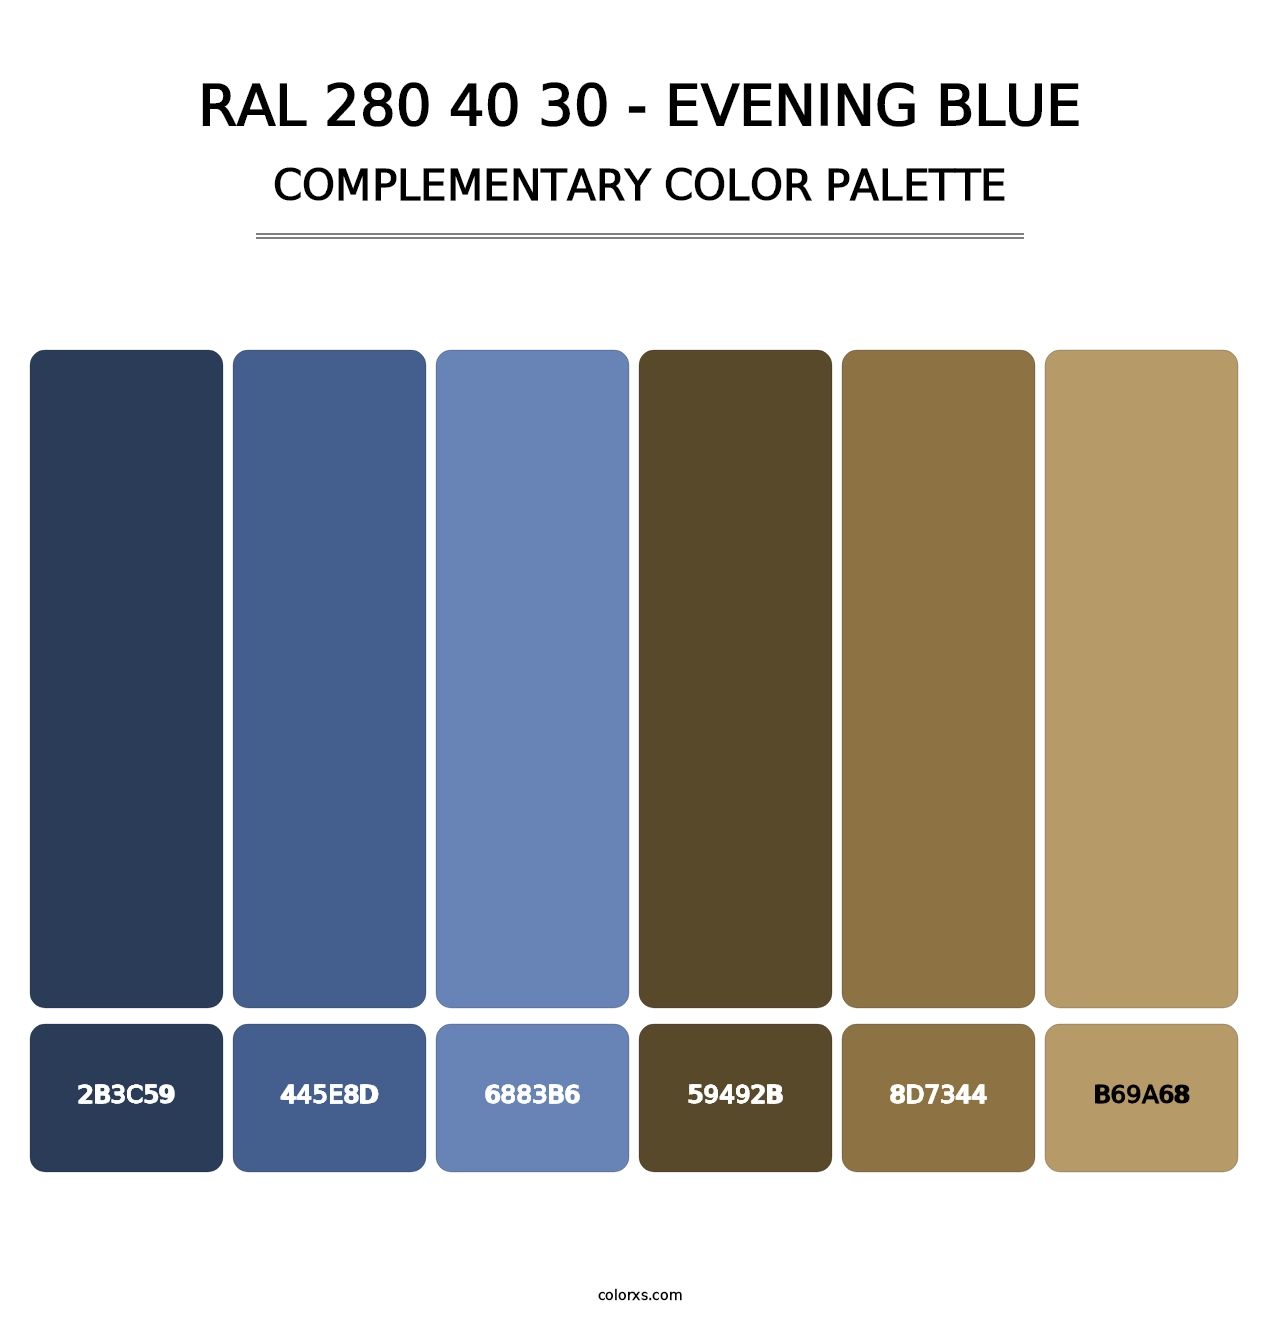 RAL 280 40 30 - Evening Blue - Complementary Color Palette